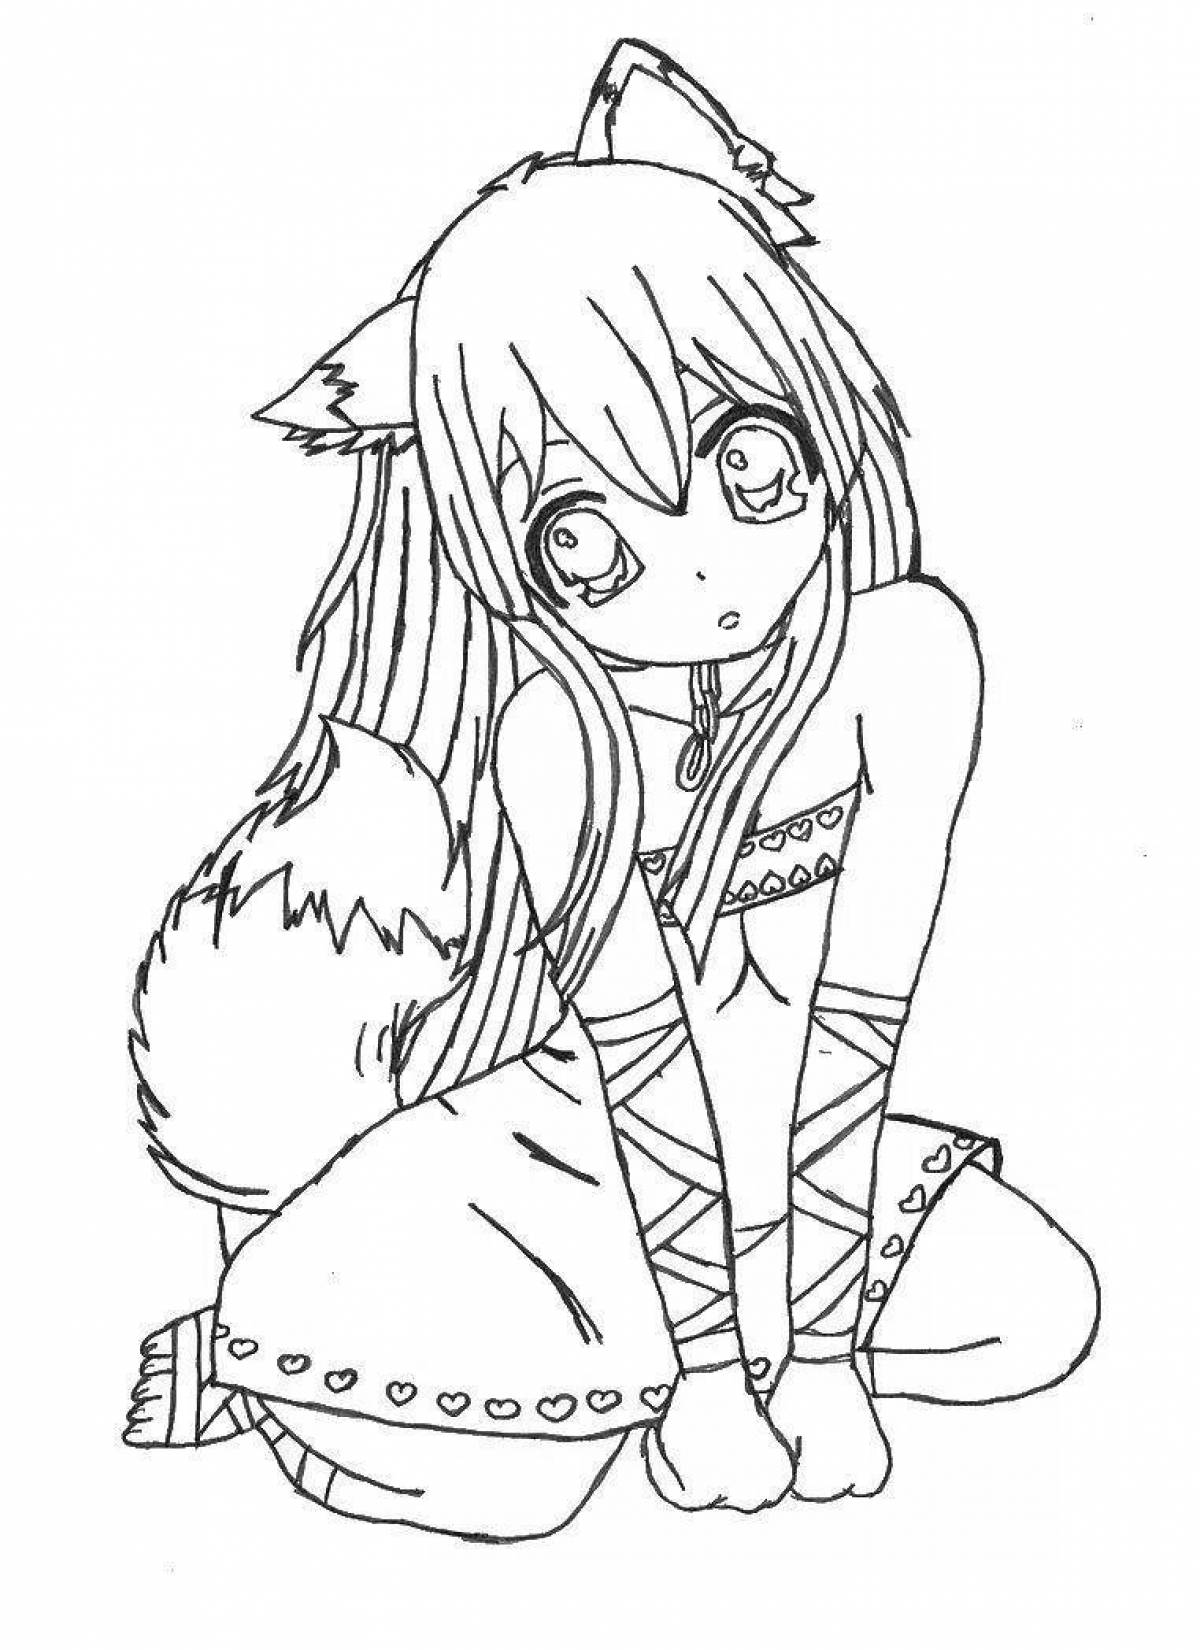 Anime freaky bear coloring book